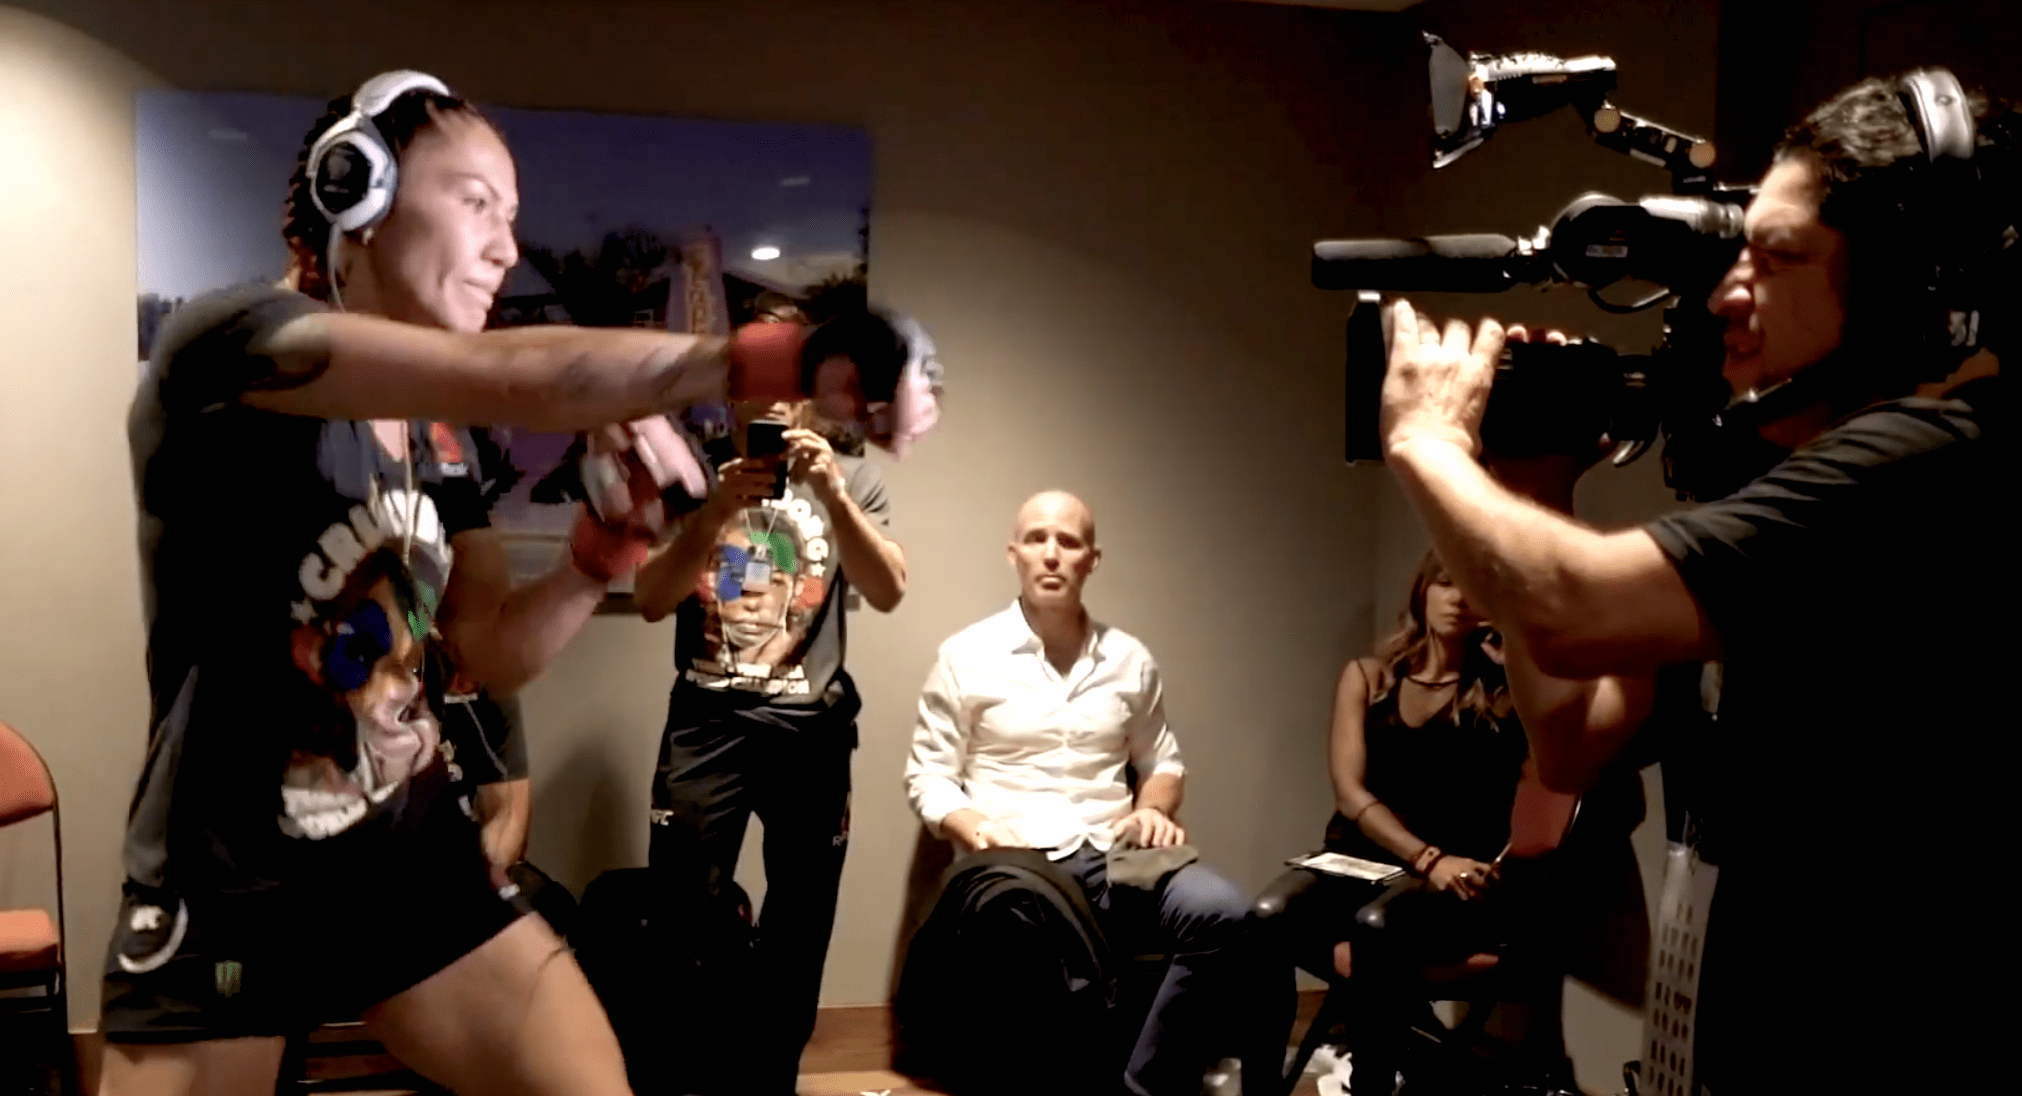 Go Behind The Scenes Of UFC 232 With Cris Cyborg